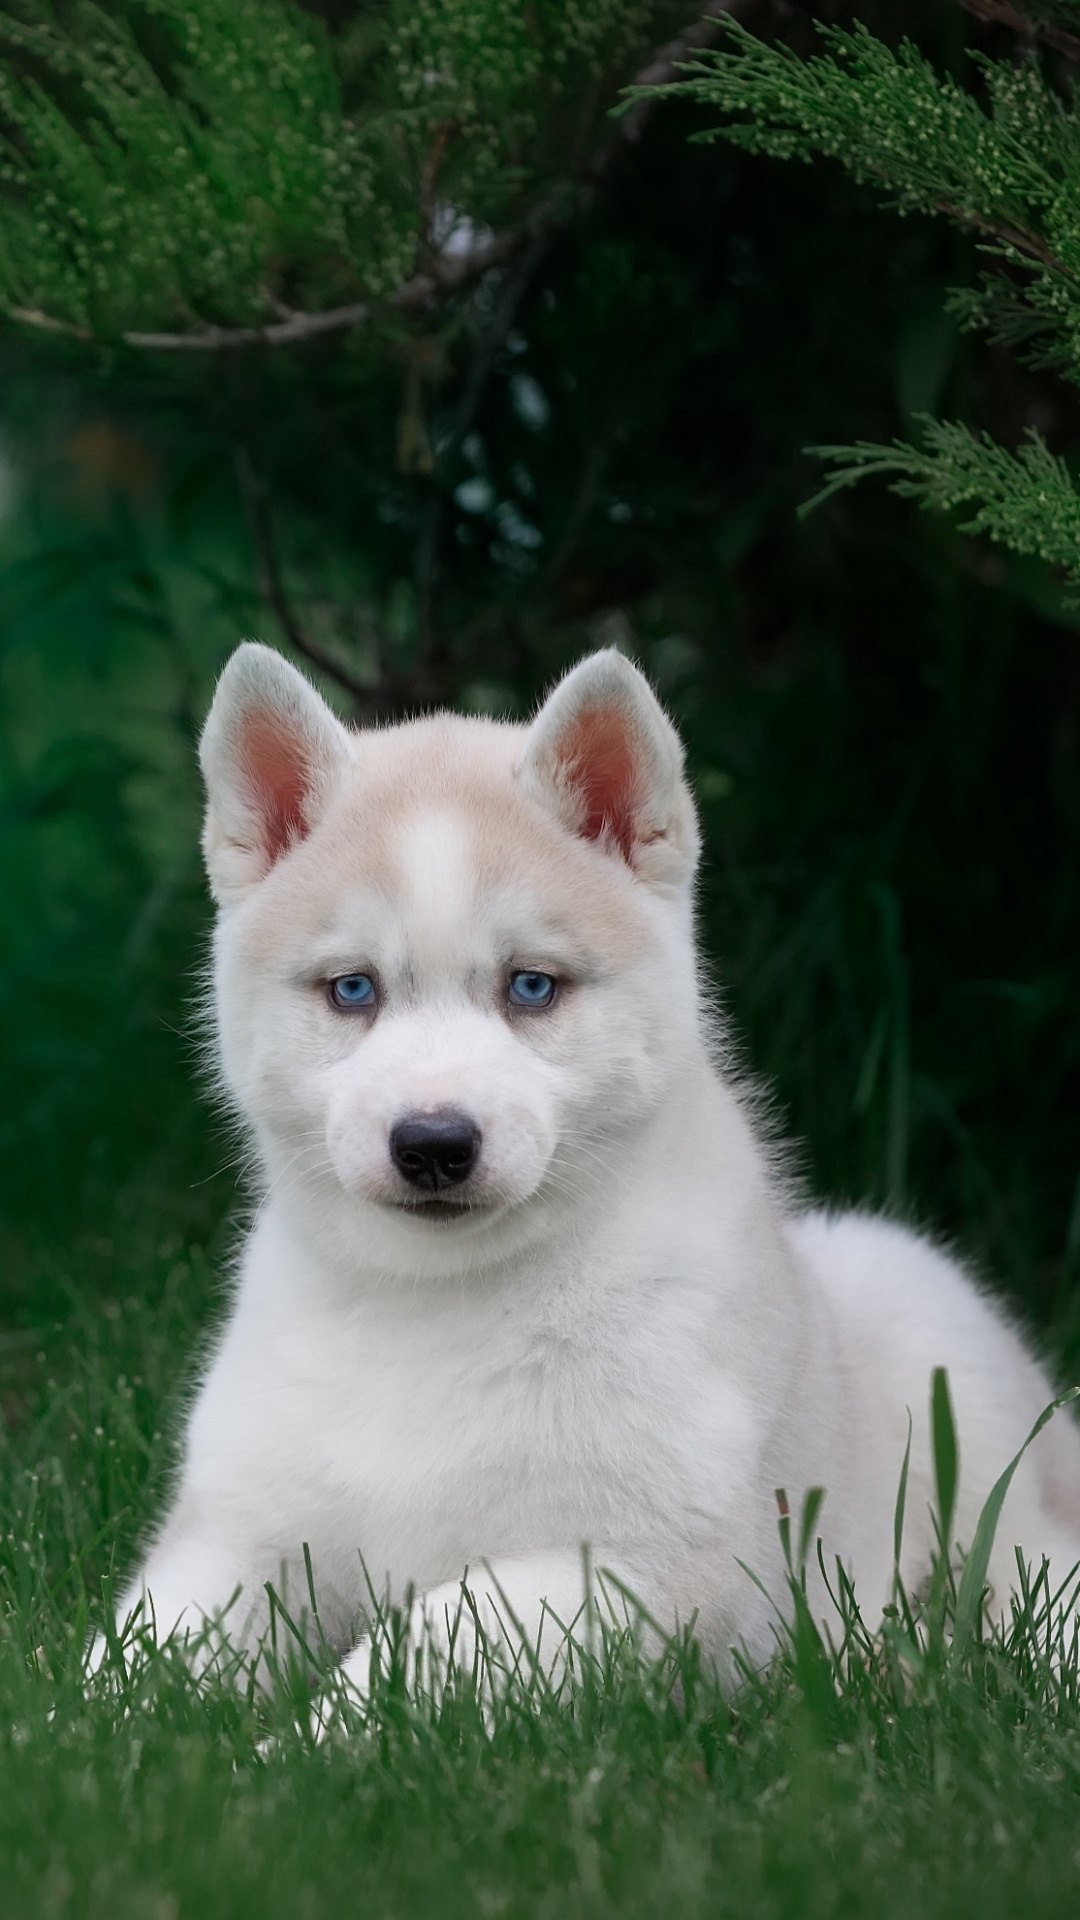 White Siberian Husky Puppy on Green Grass Field During Daytime. Wallpaper in 1080x1920 Resolution